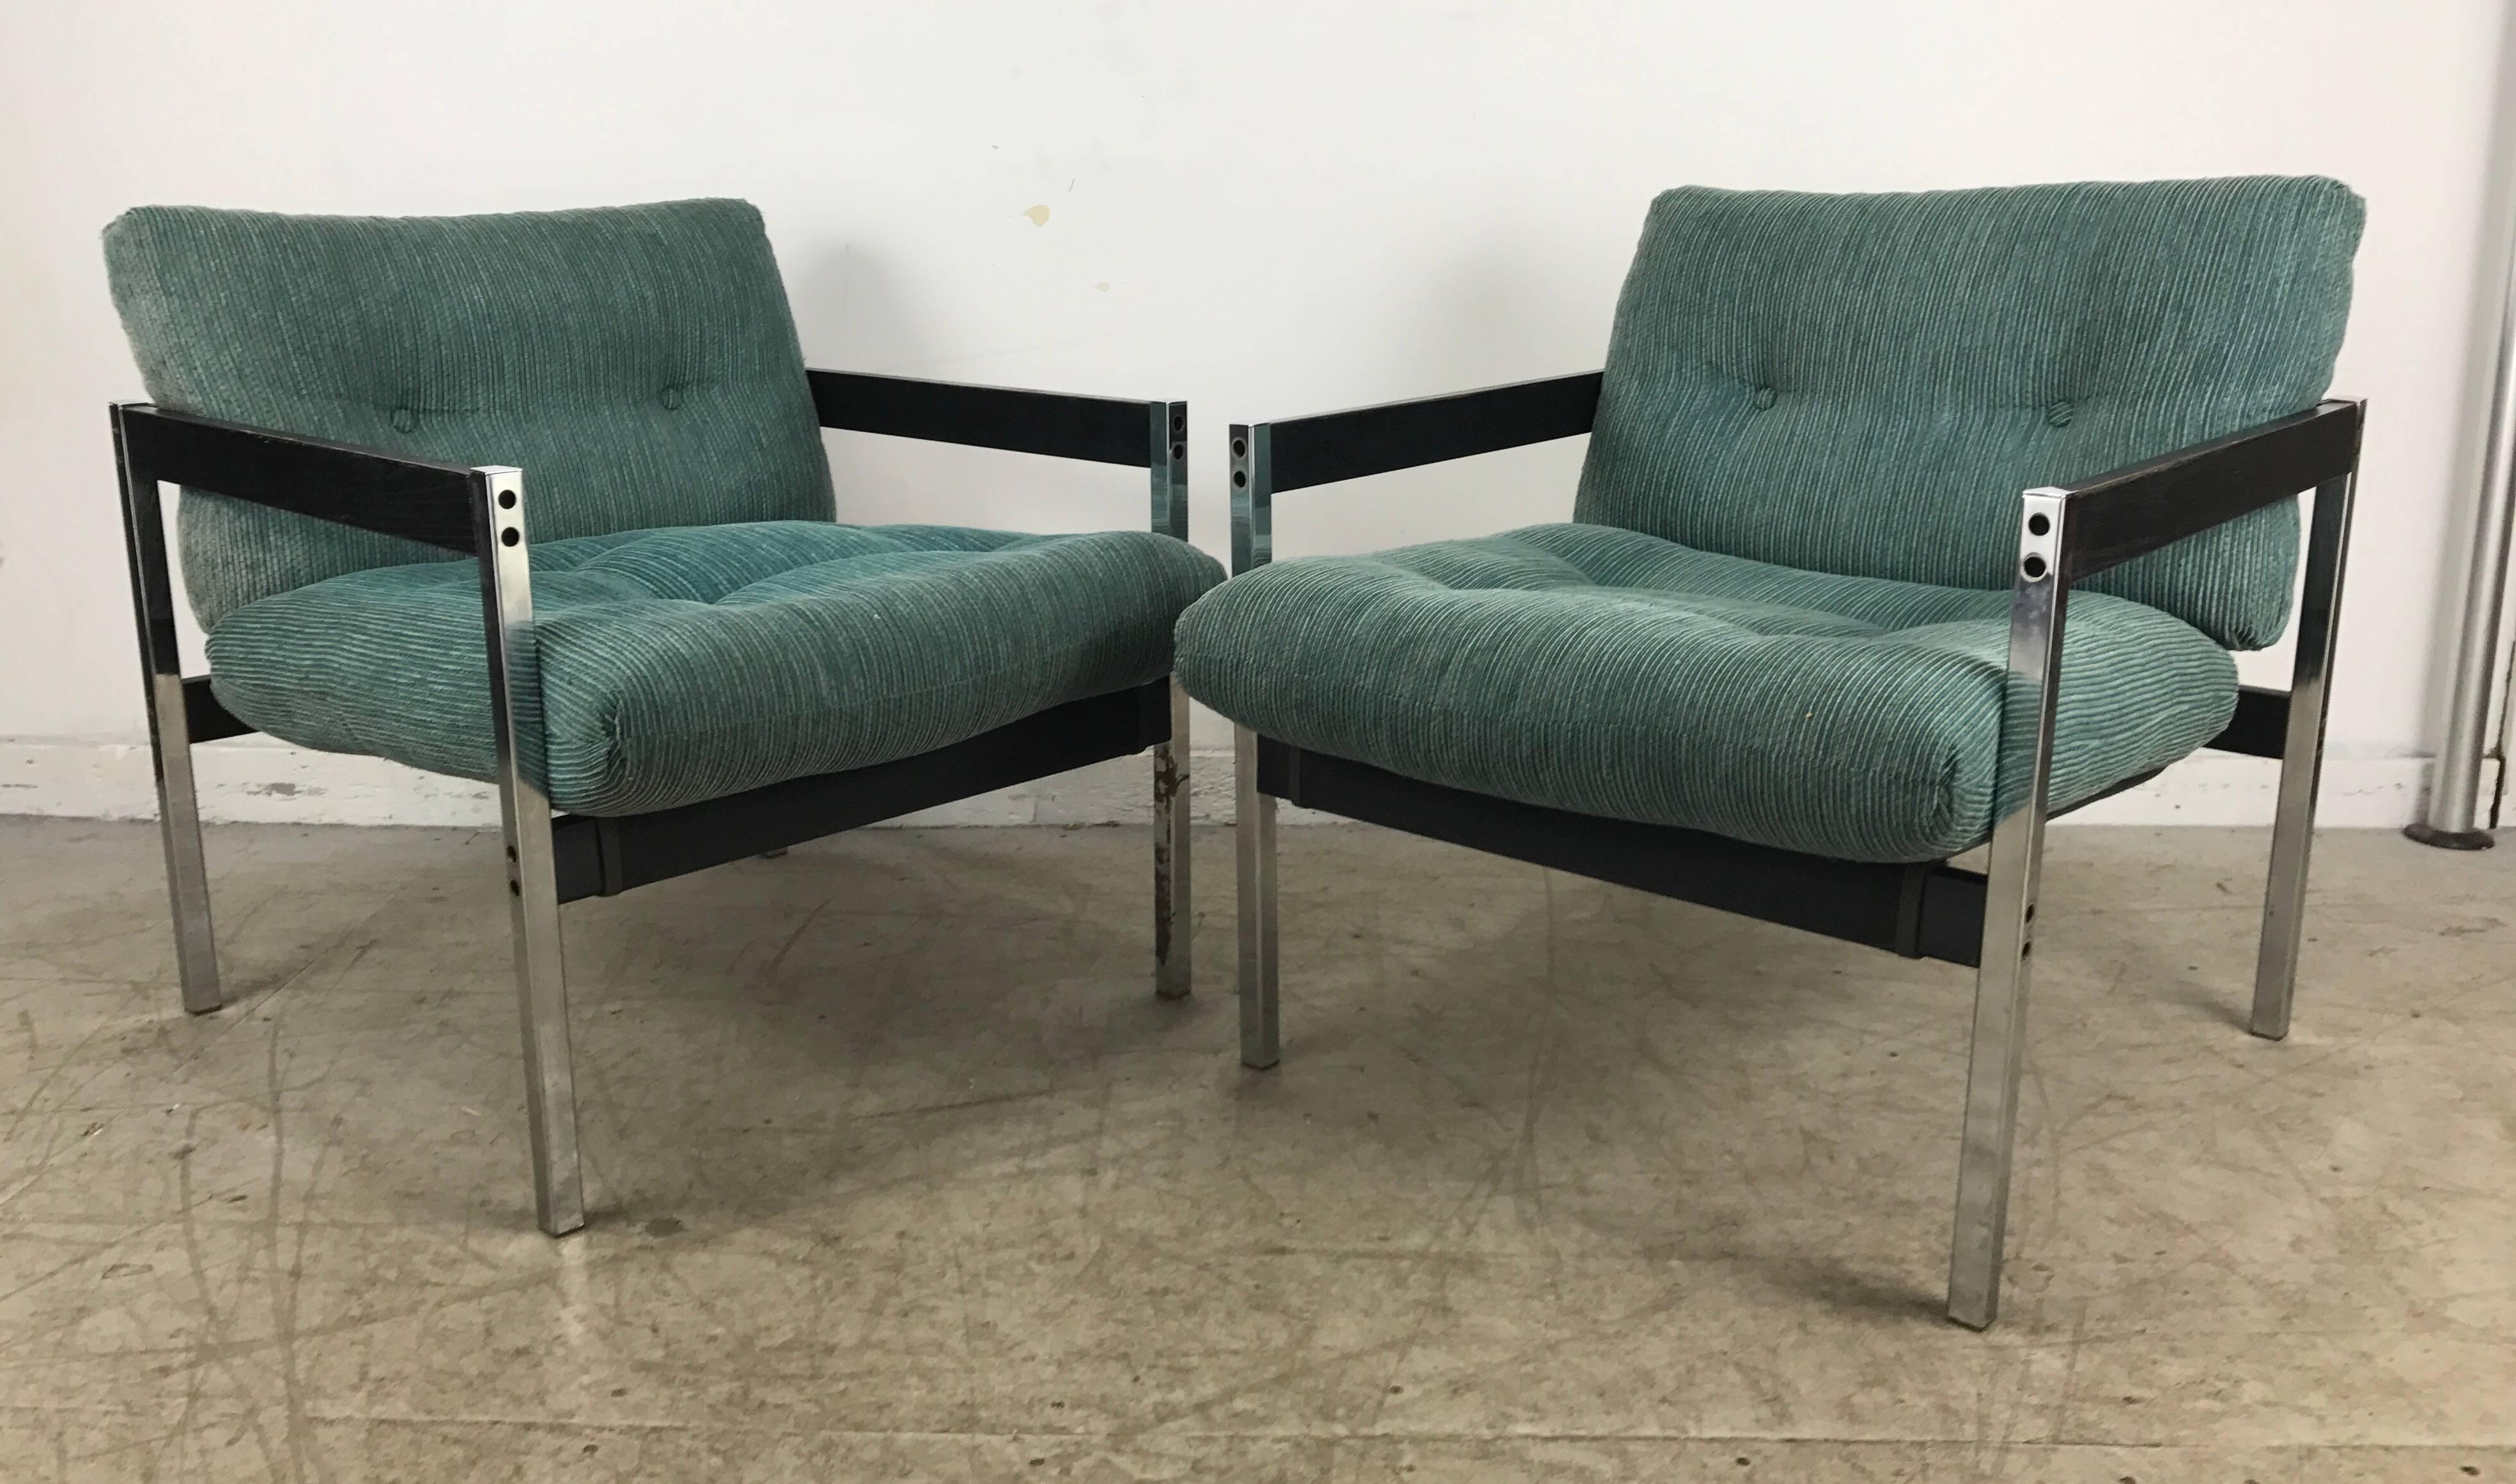 American Pair of Modernist Chrome and Wood Sling Lounge Chairs after Charles Pollock